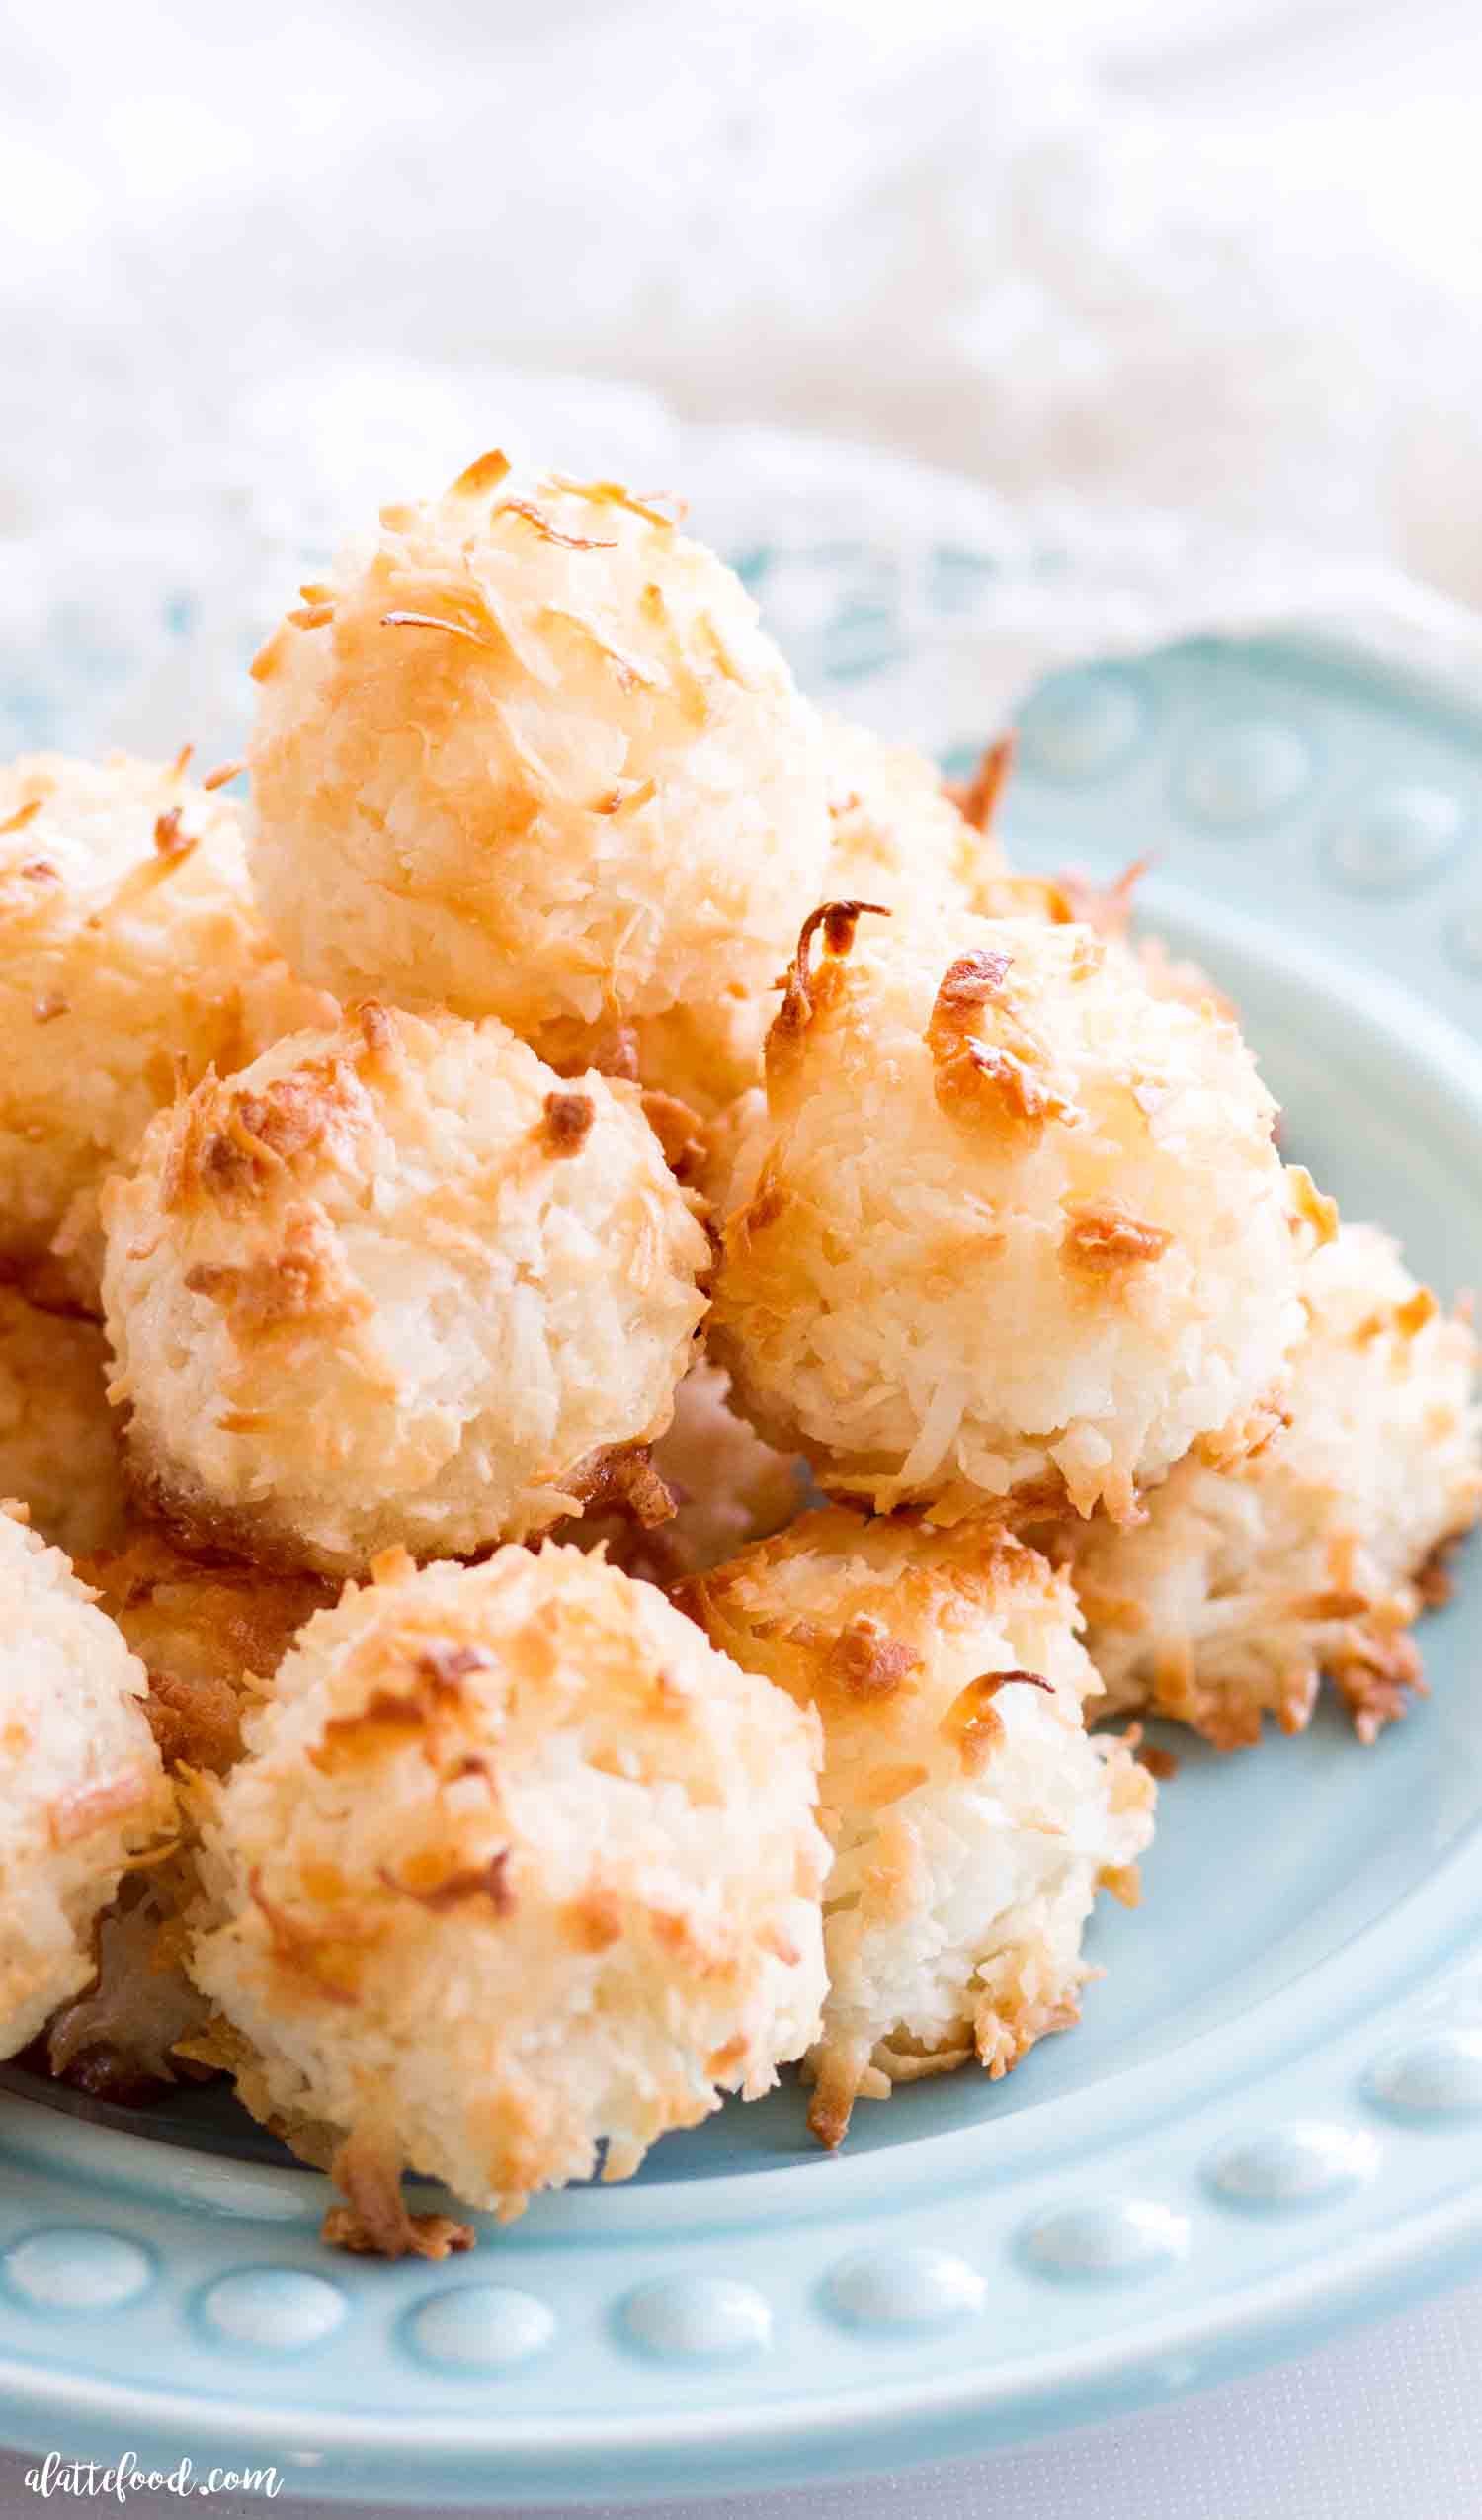 Coconut Macaroon Recipe Without Condensed Milk: Step by Step Guide  